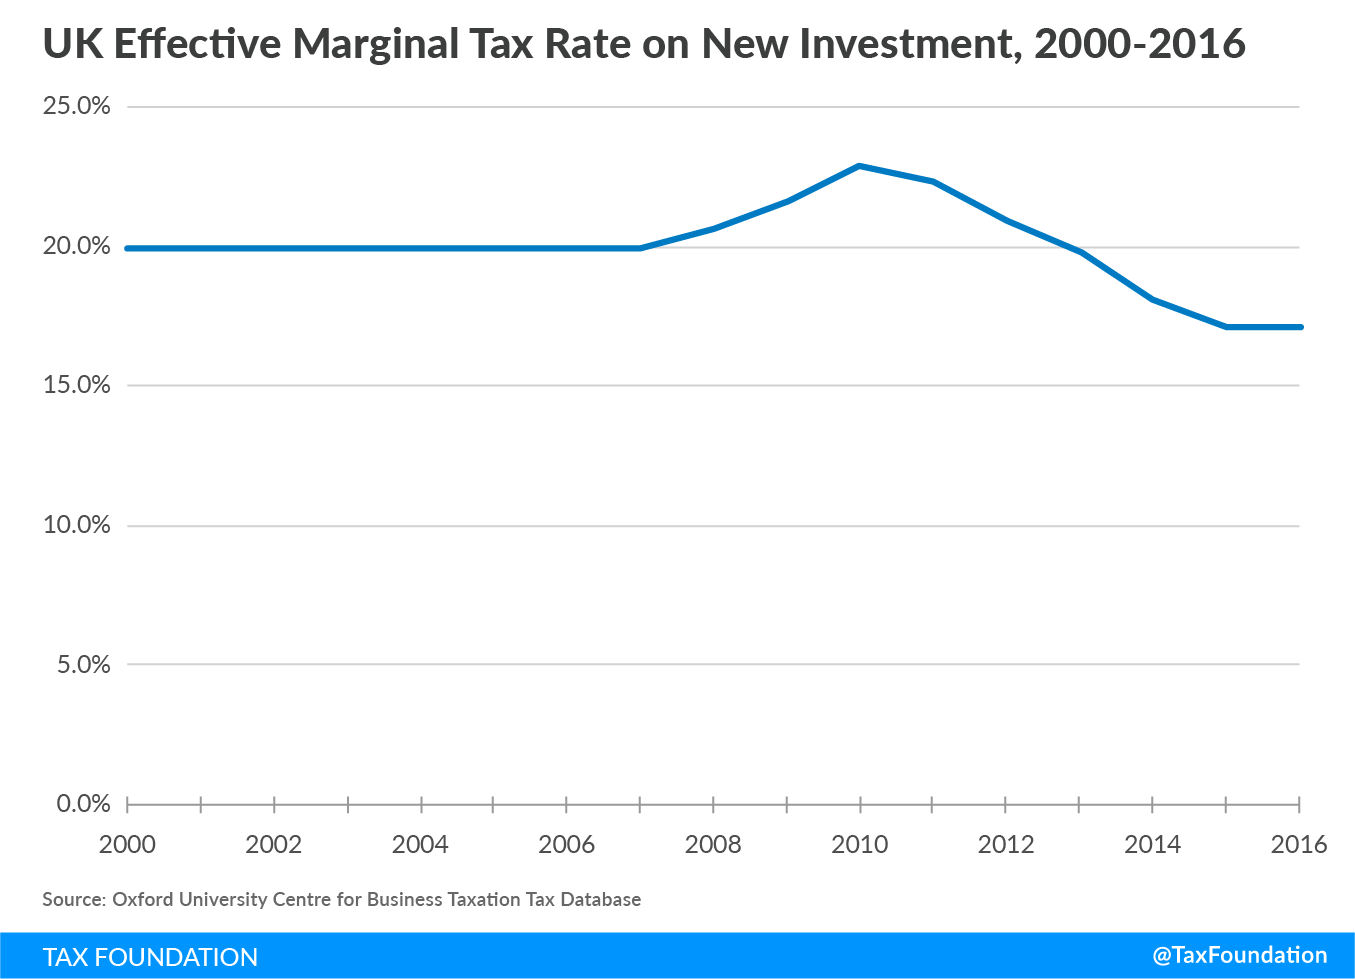 UK Effective Marginal Tax Rate on New Investment, 2000-2016